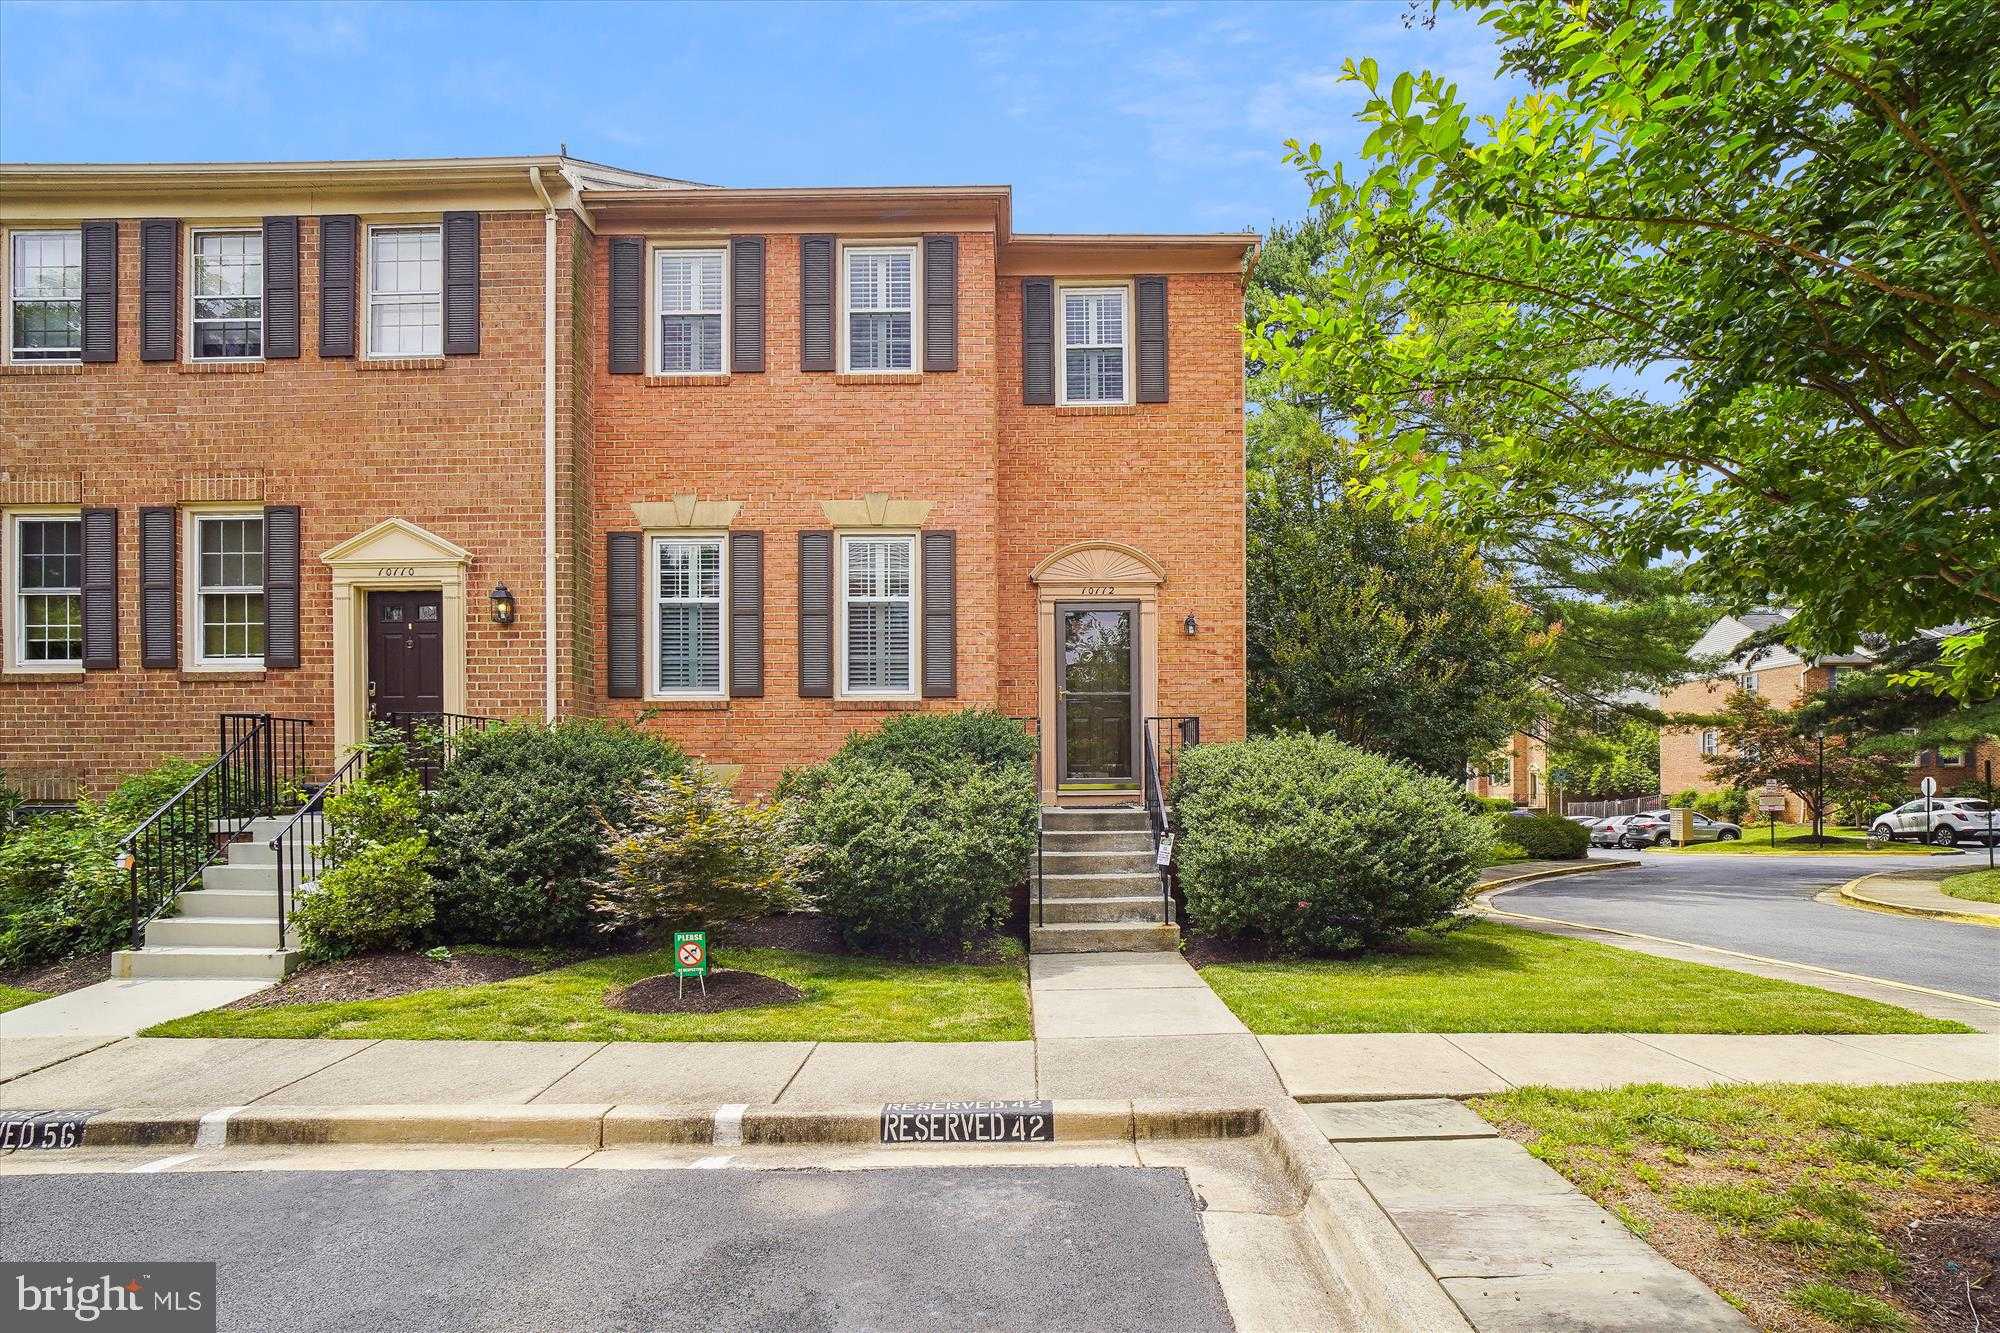 View BETHESDA, MD 20817 townhome